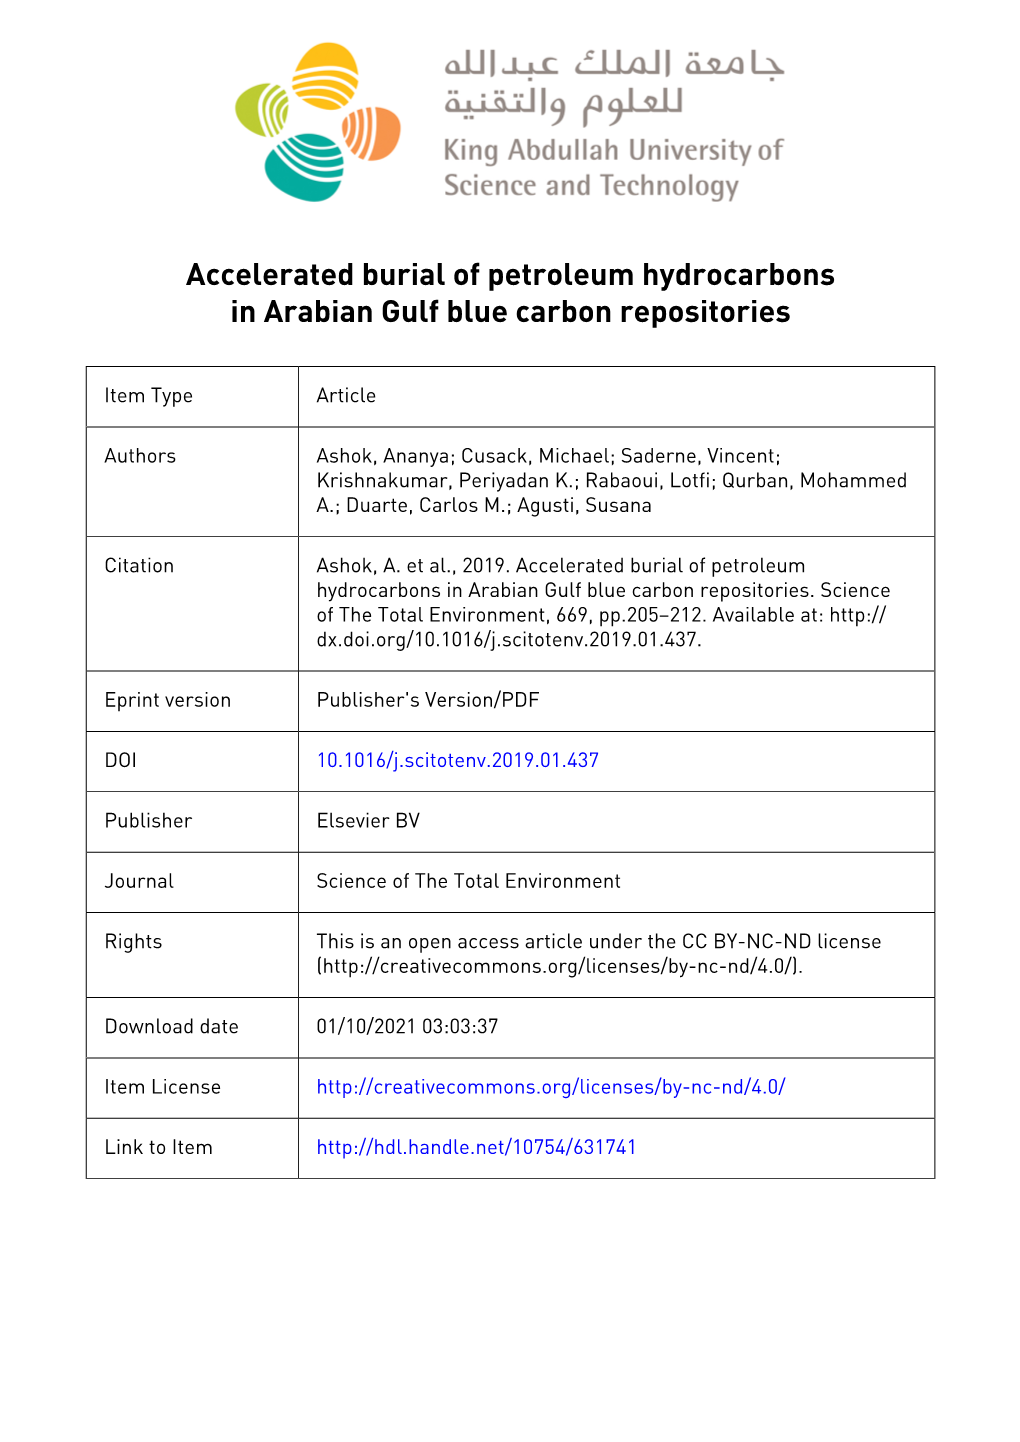 Accelerated Burial of Petroleum Hydrocarbons in Arabian Gulf Blue Carbon Repositories